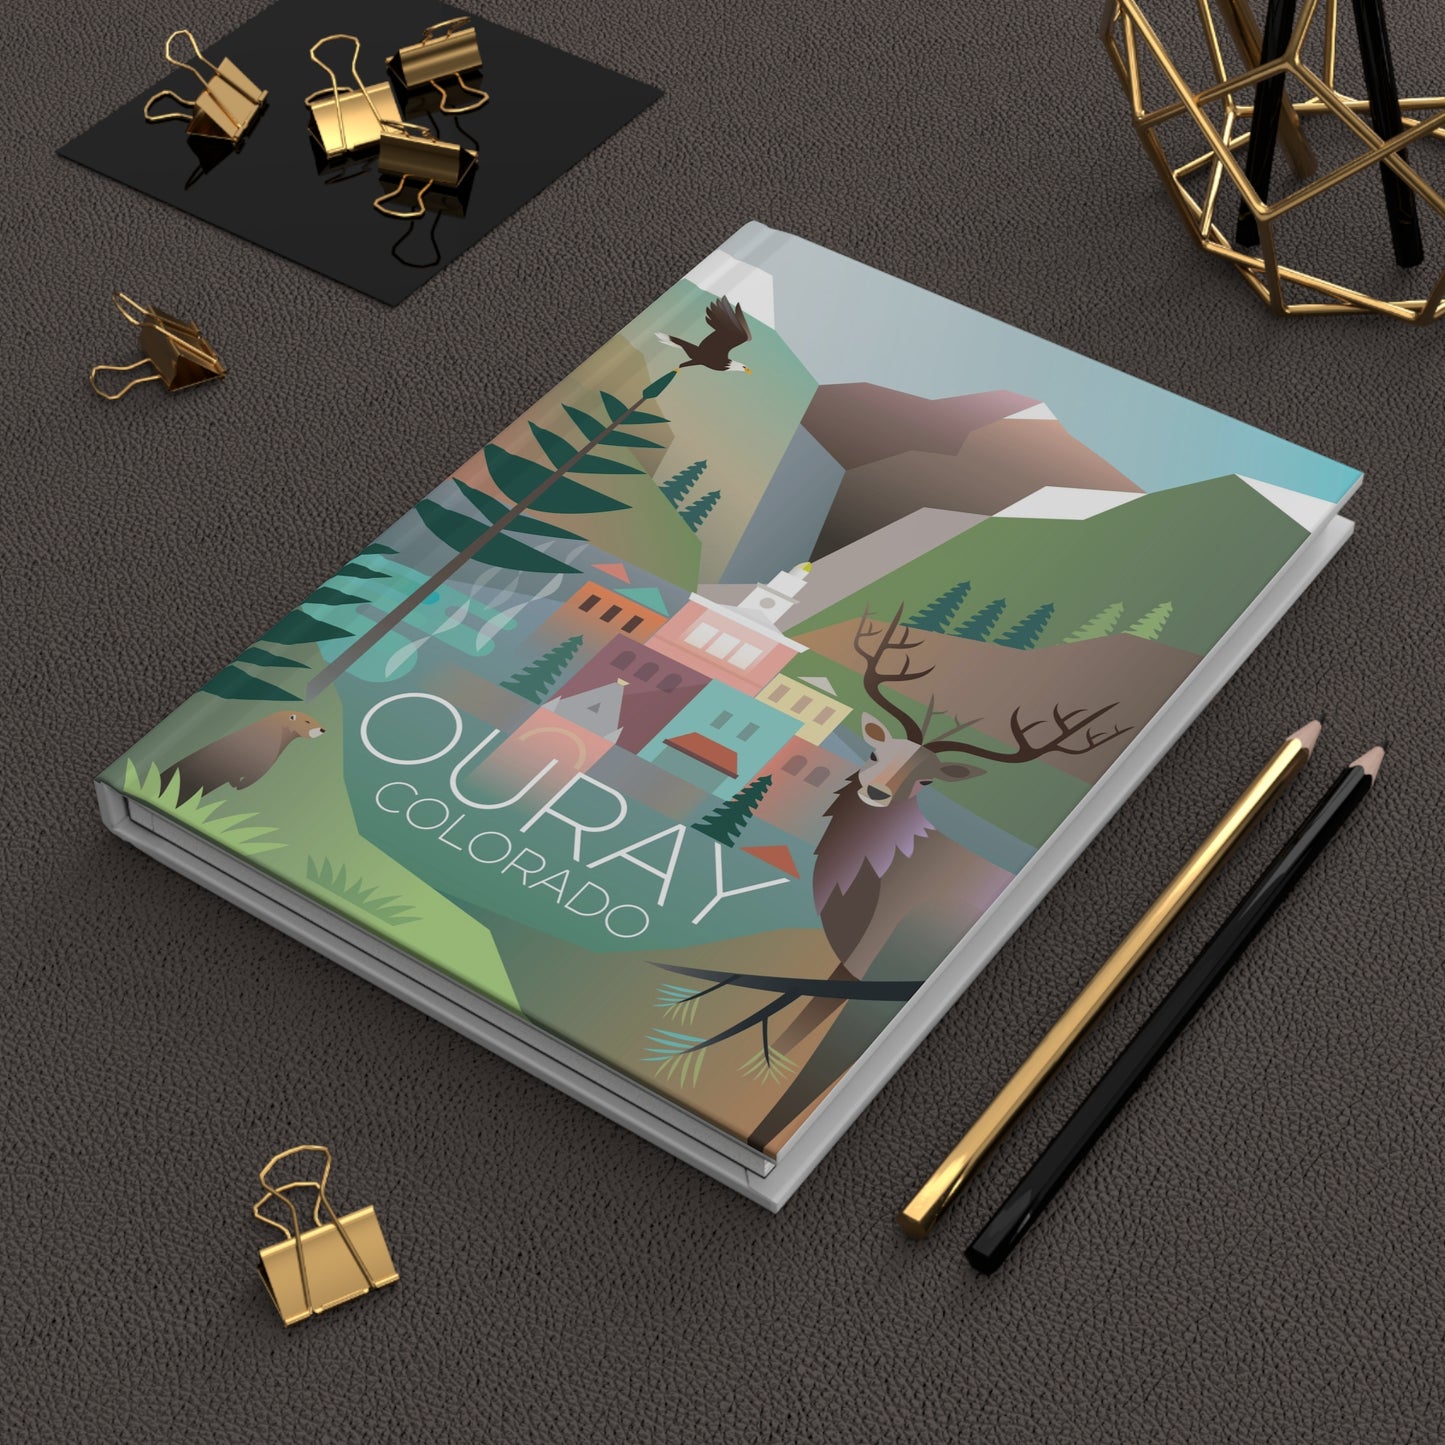 Ouray Hardcover Journal